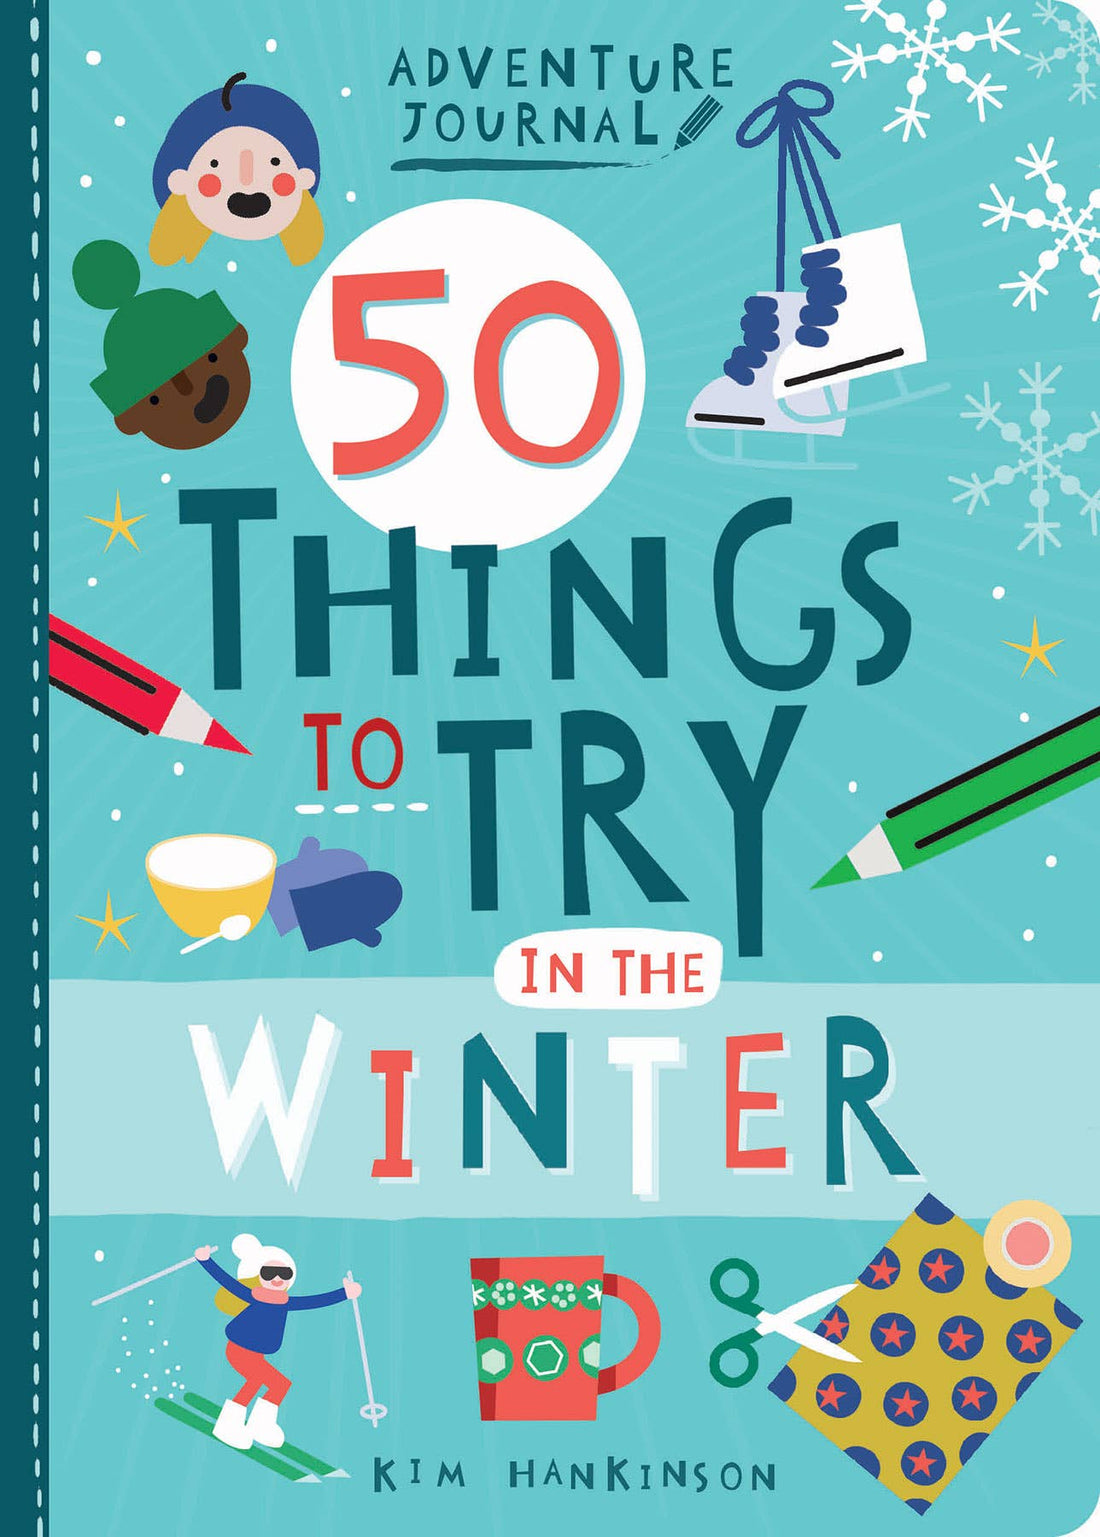 Adventure Journal: 50 Things to Try in the Winter by Kim Hankison